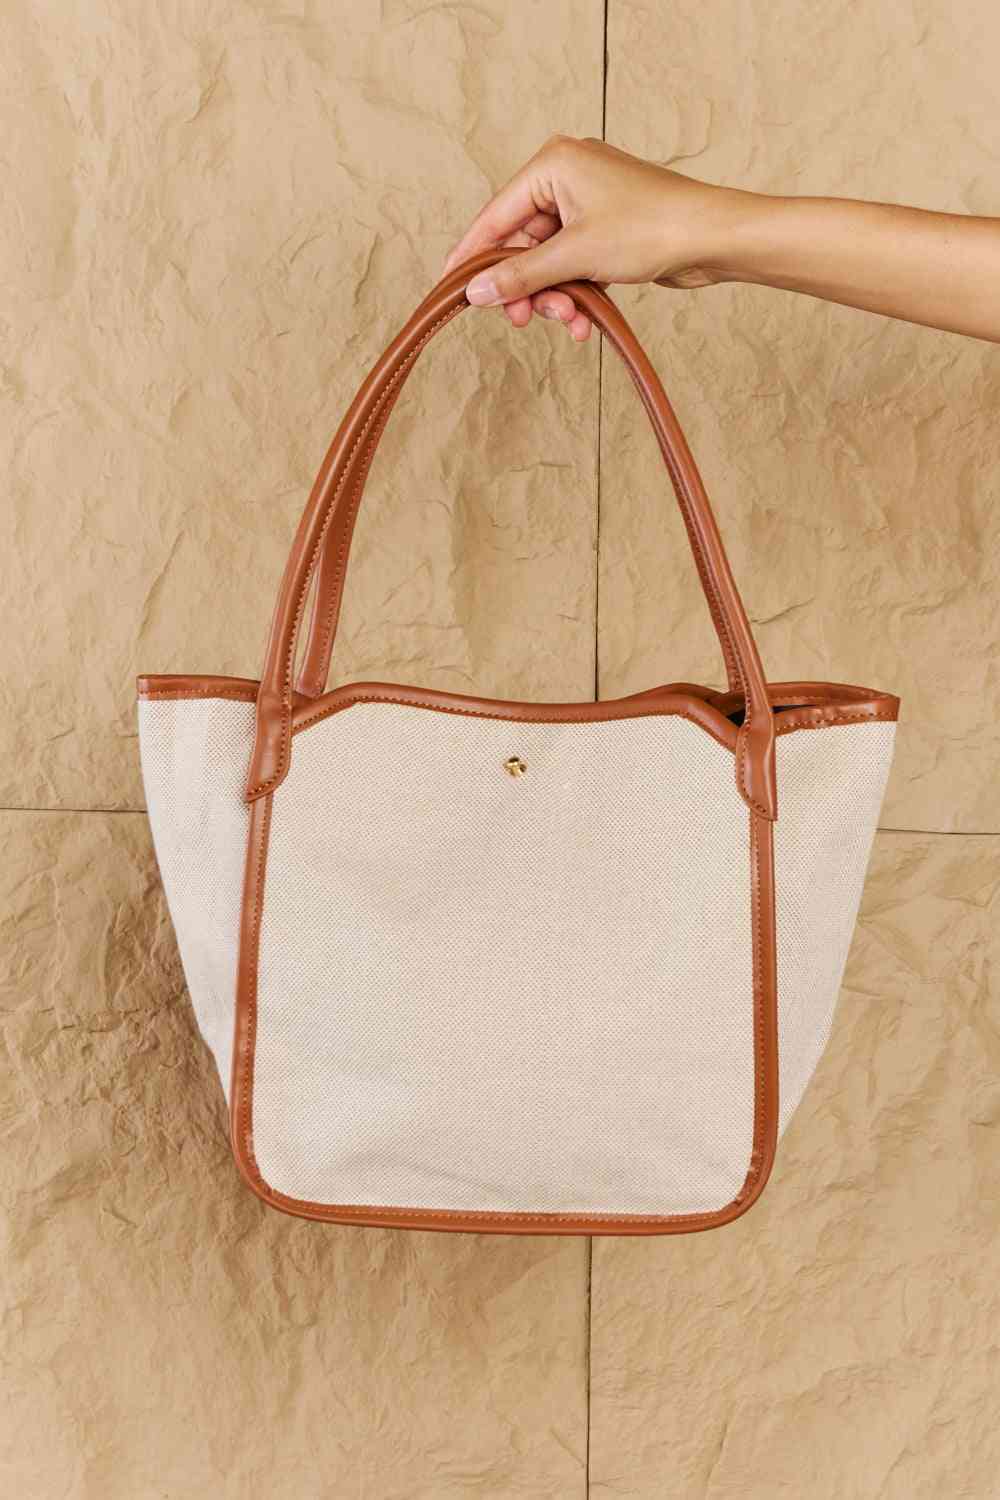 Fame Beach Chic Faux Leather Trim Tote Bag in Ochre - Handbag - FITGGINS